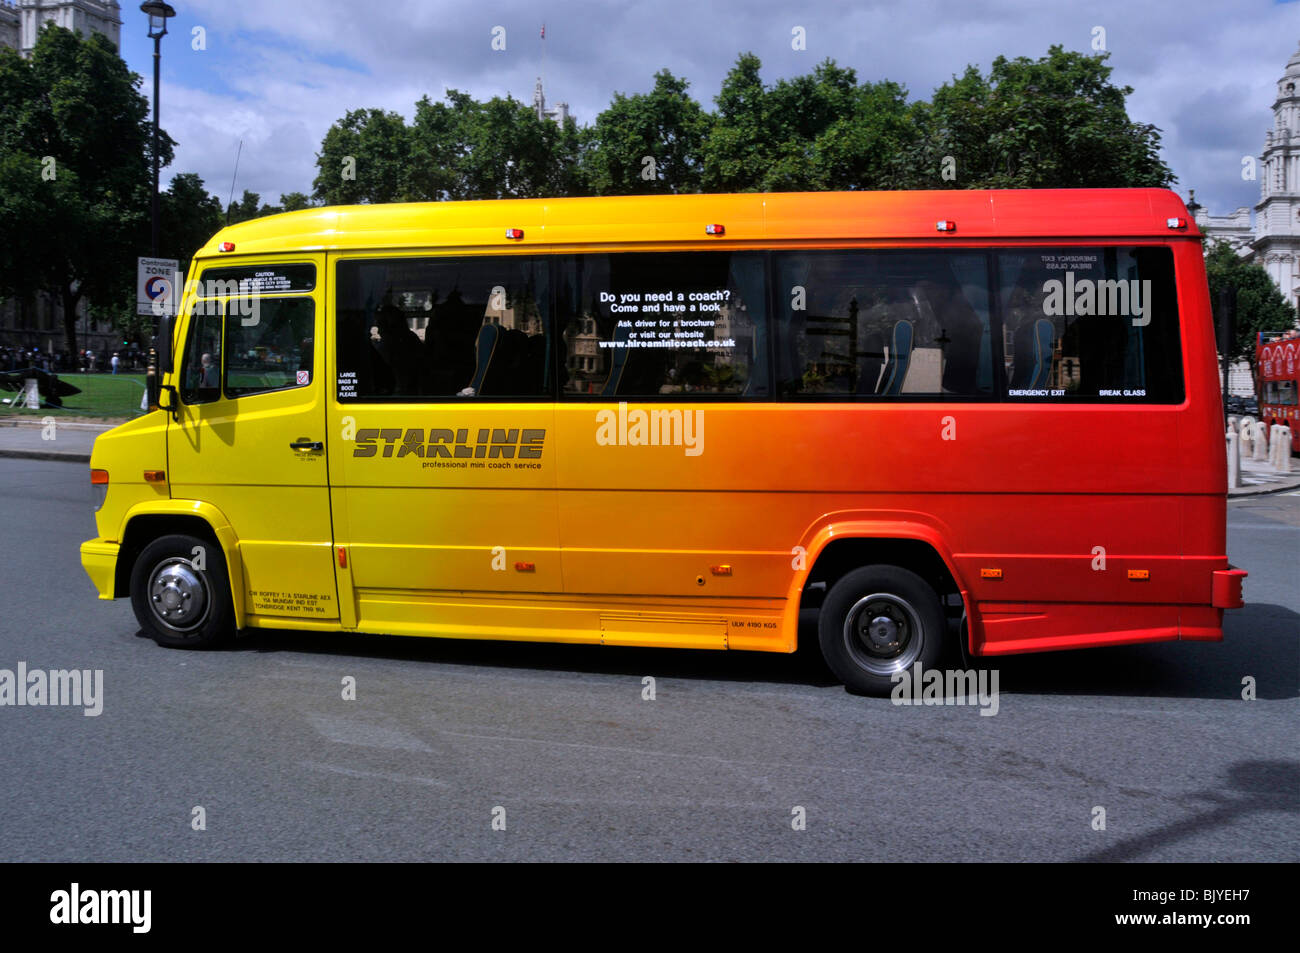 Side view of Starline minibus coach bus for private travel hire colourful paint job graduated from bright yellow to vivid red driving in London UK Stock Photo